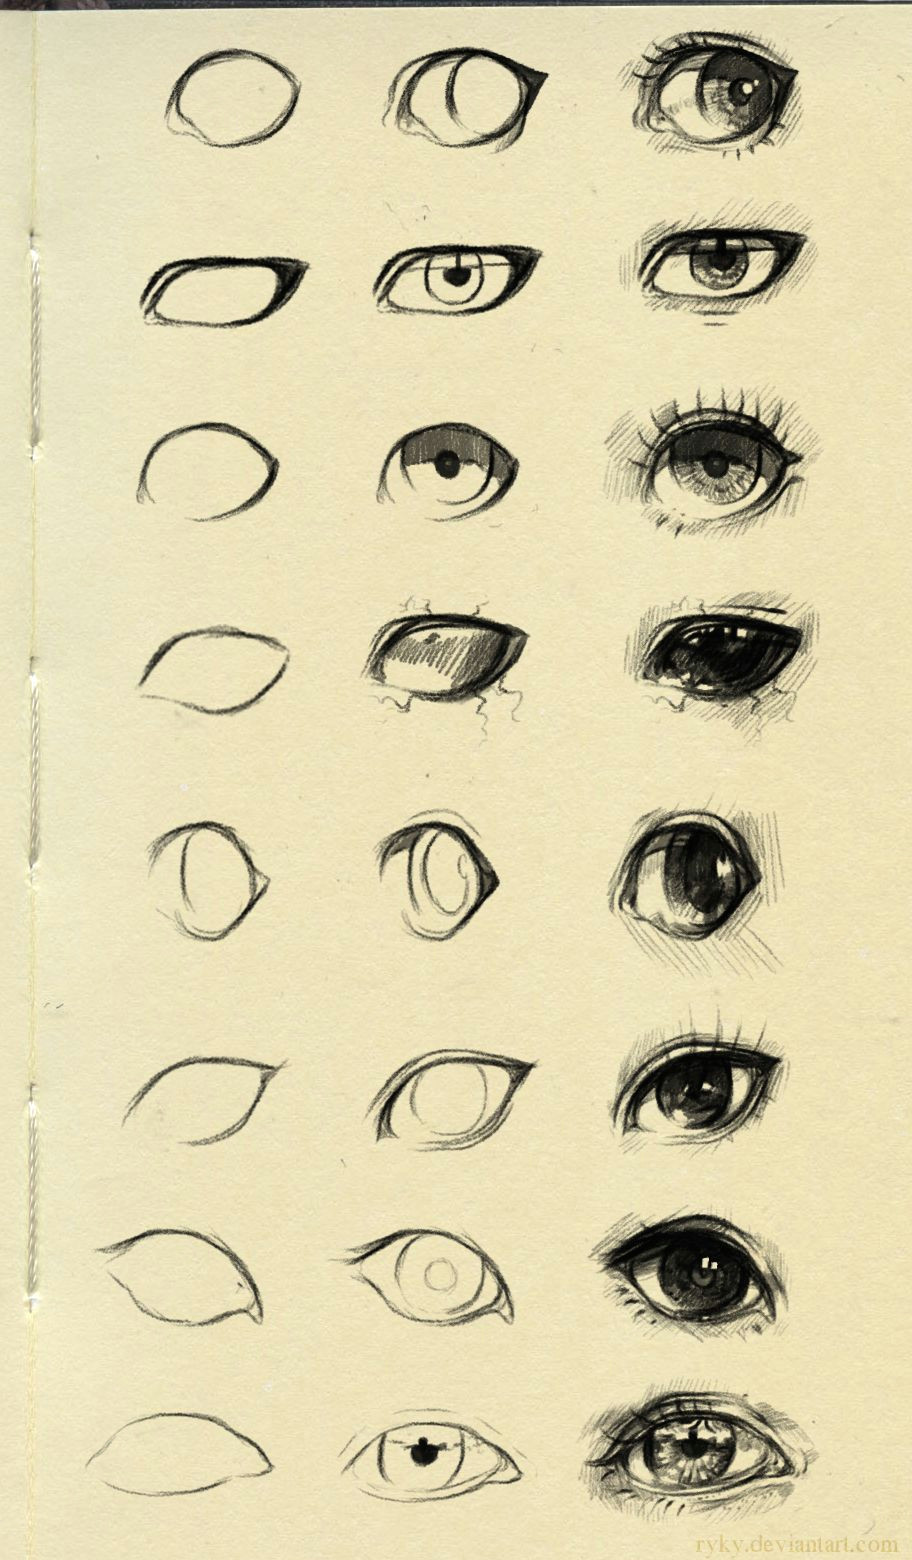 Drawing A Human Eye Step by Step Eyes Reference 3 by Ryky Deviantart Com On Deviantart Artist S